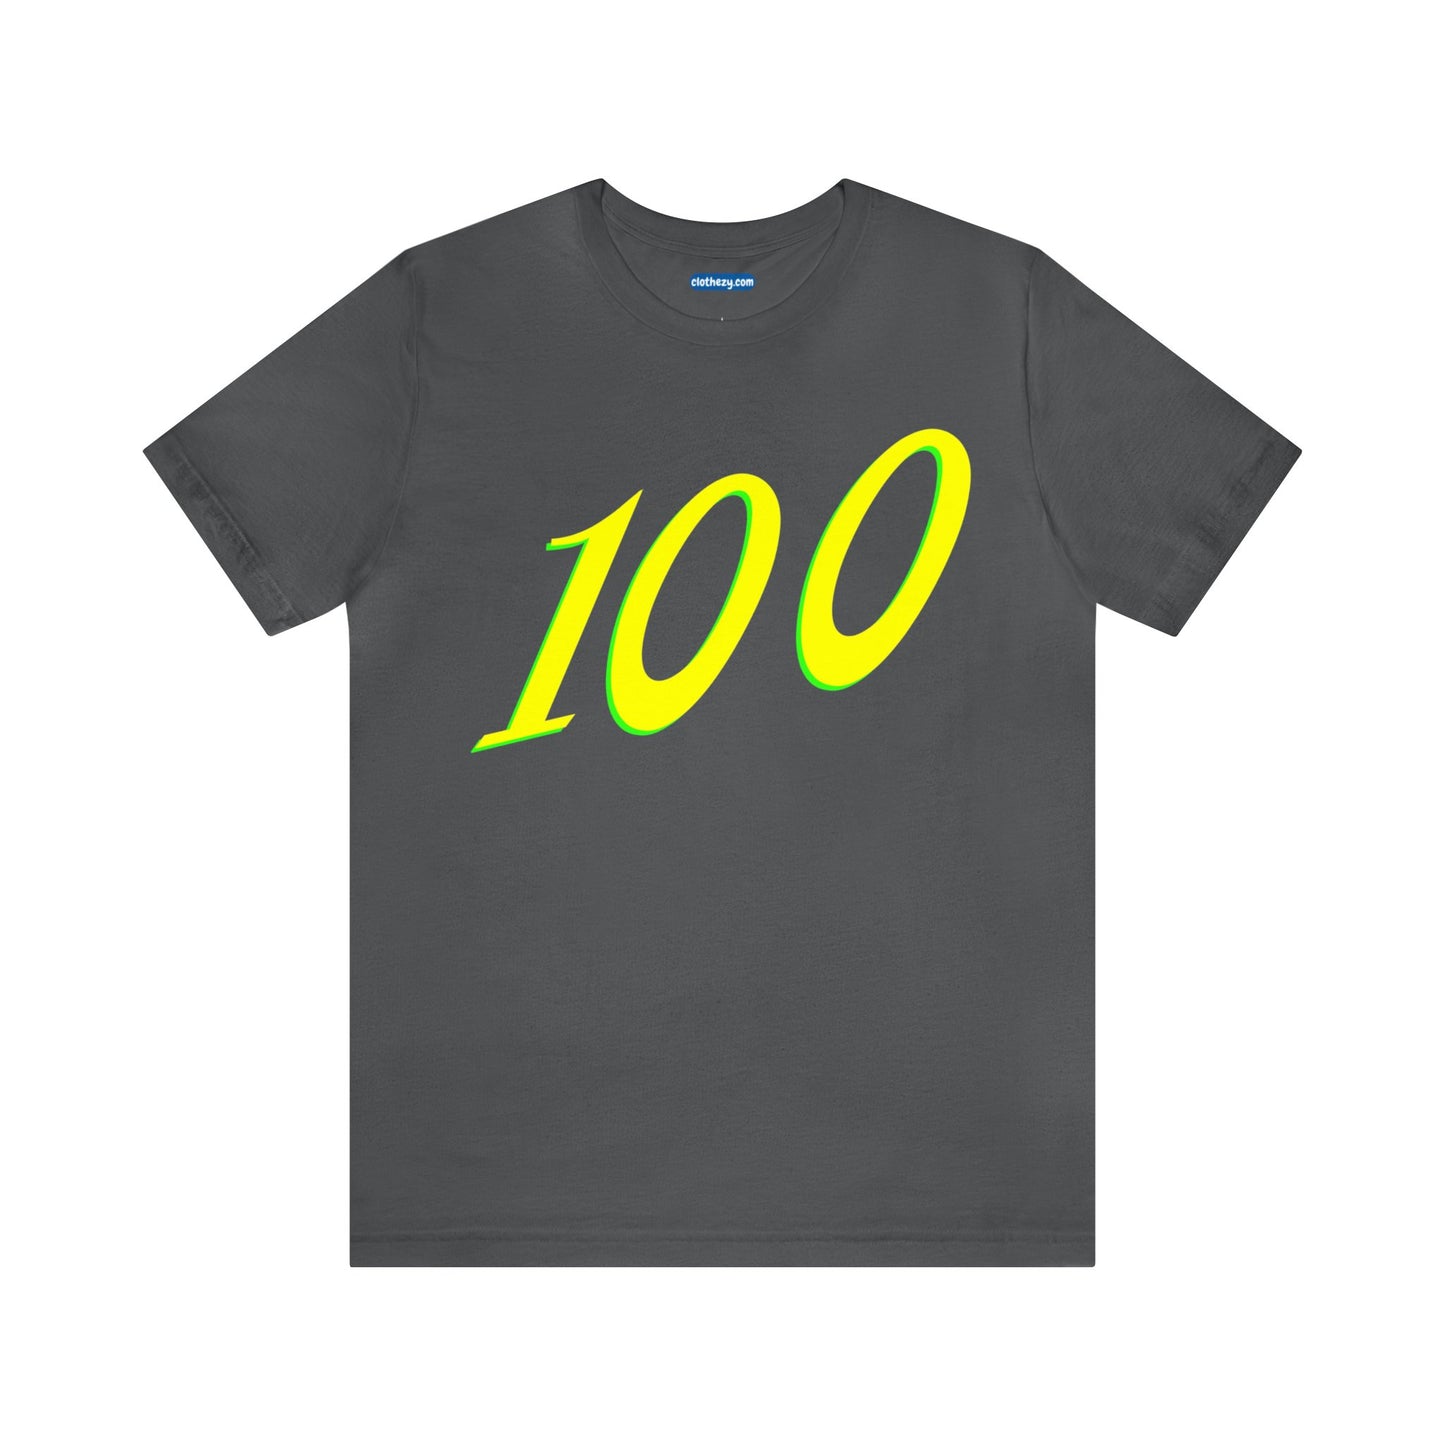 Number 100 Design - Soft Cotton Tee for birthdays and celebrations, Gift for friends and family, Multiple Options by clothezy.com in Black Size Small - Buy Now